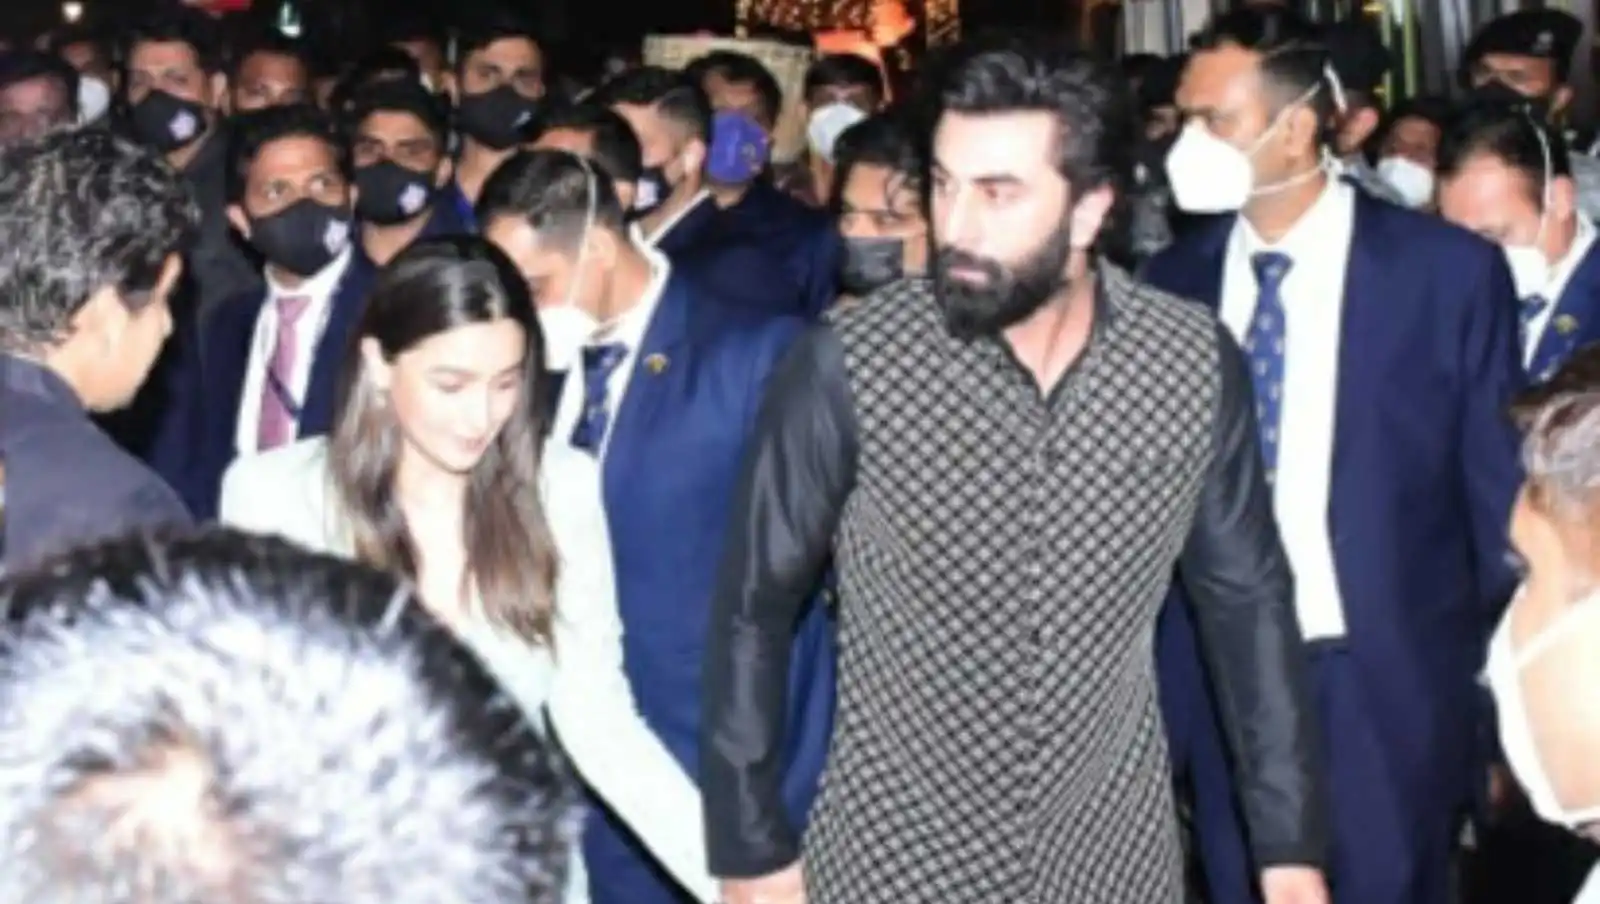 Shah Rukh Khan & Salman Khan refuse to get clicked at the Ambani bash but Ranbir and Alia steal the show hand in hand , see pics